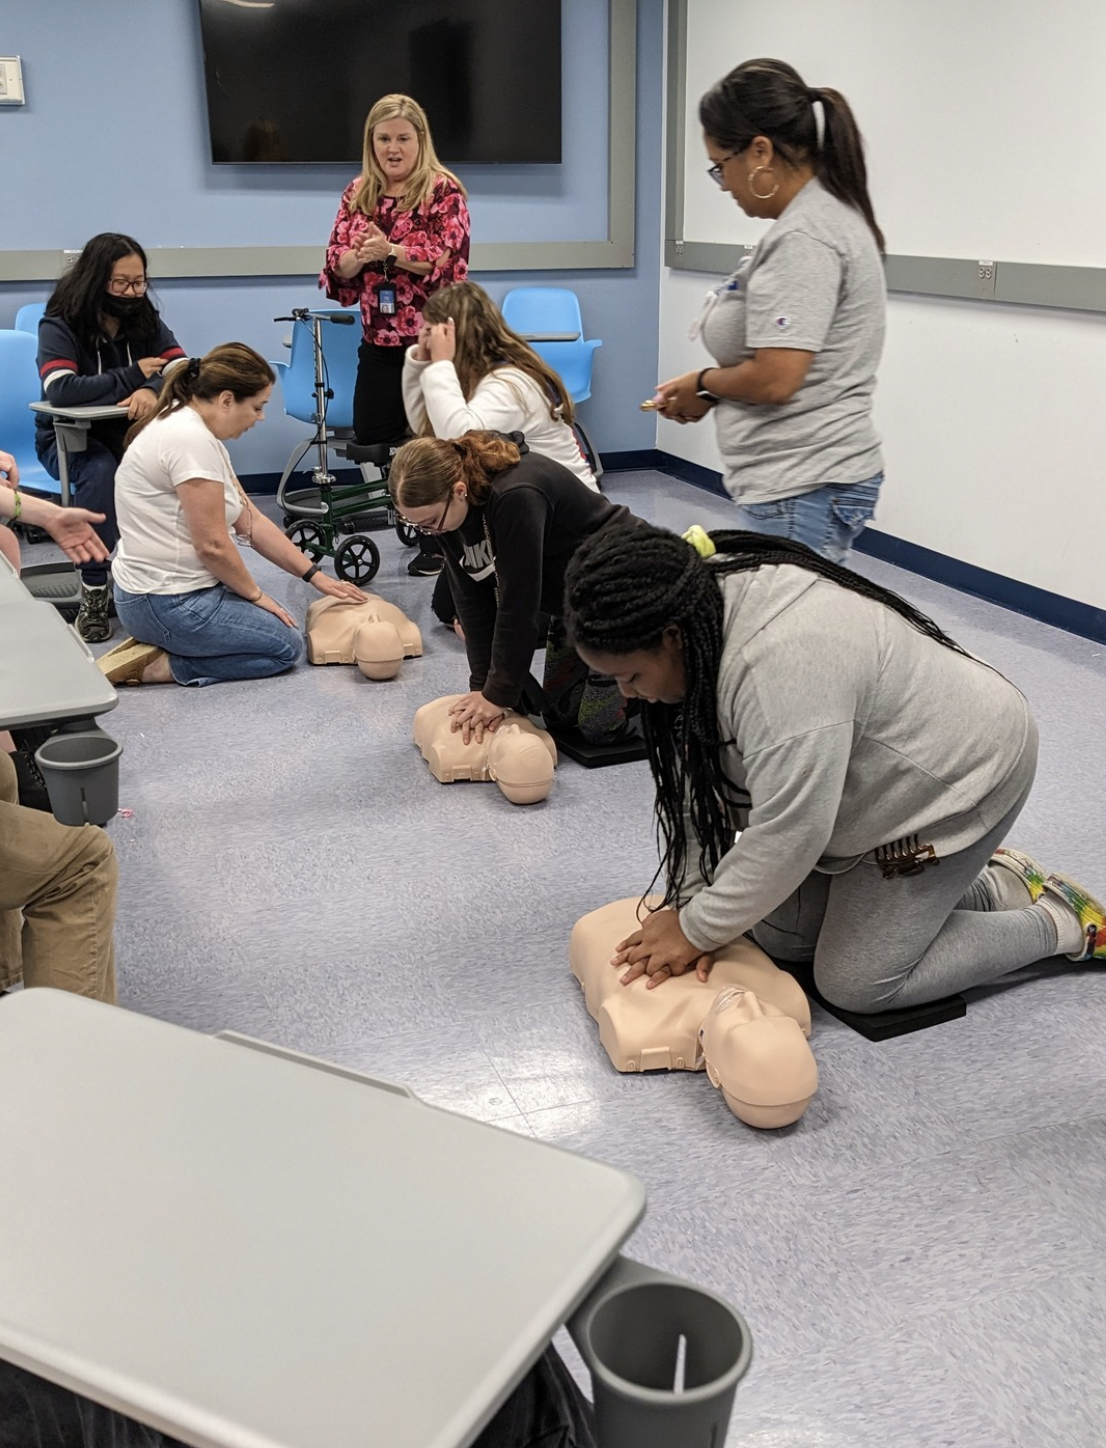 students performing CPR training in a learning lab.